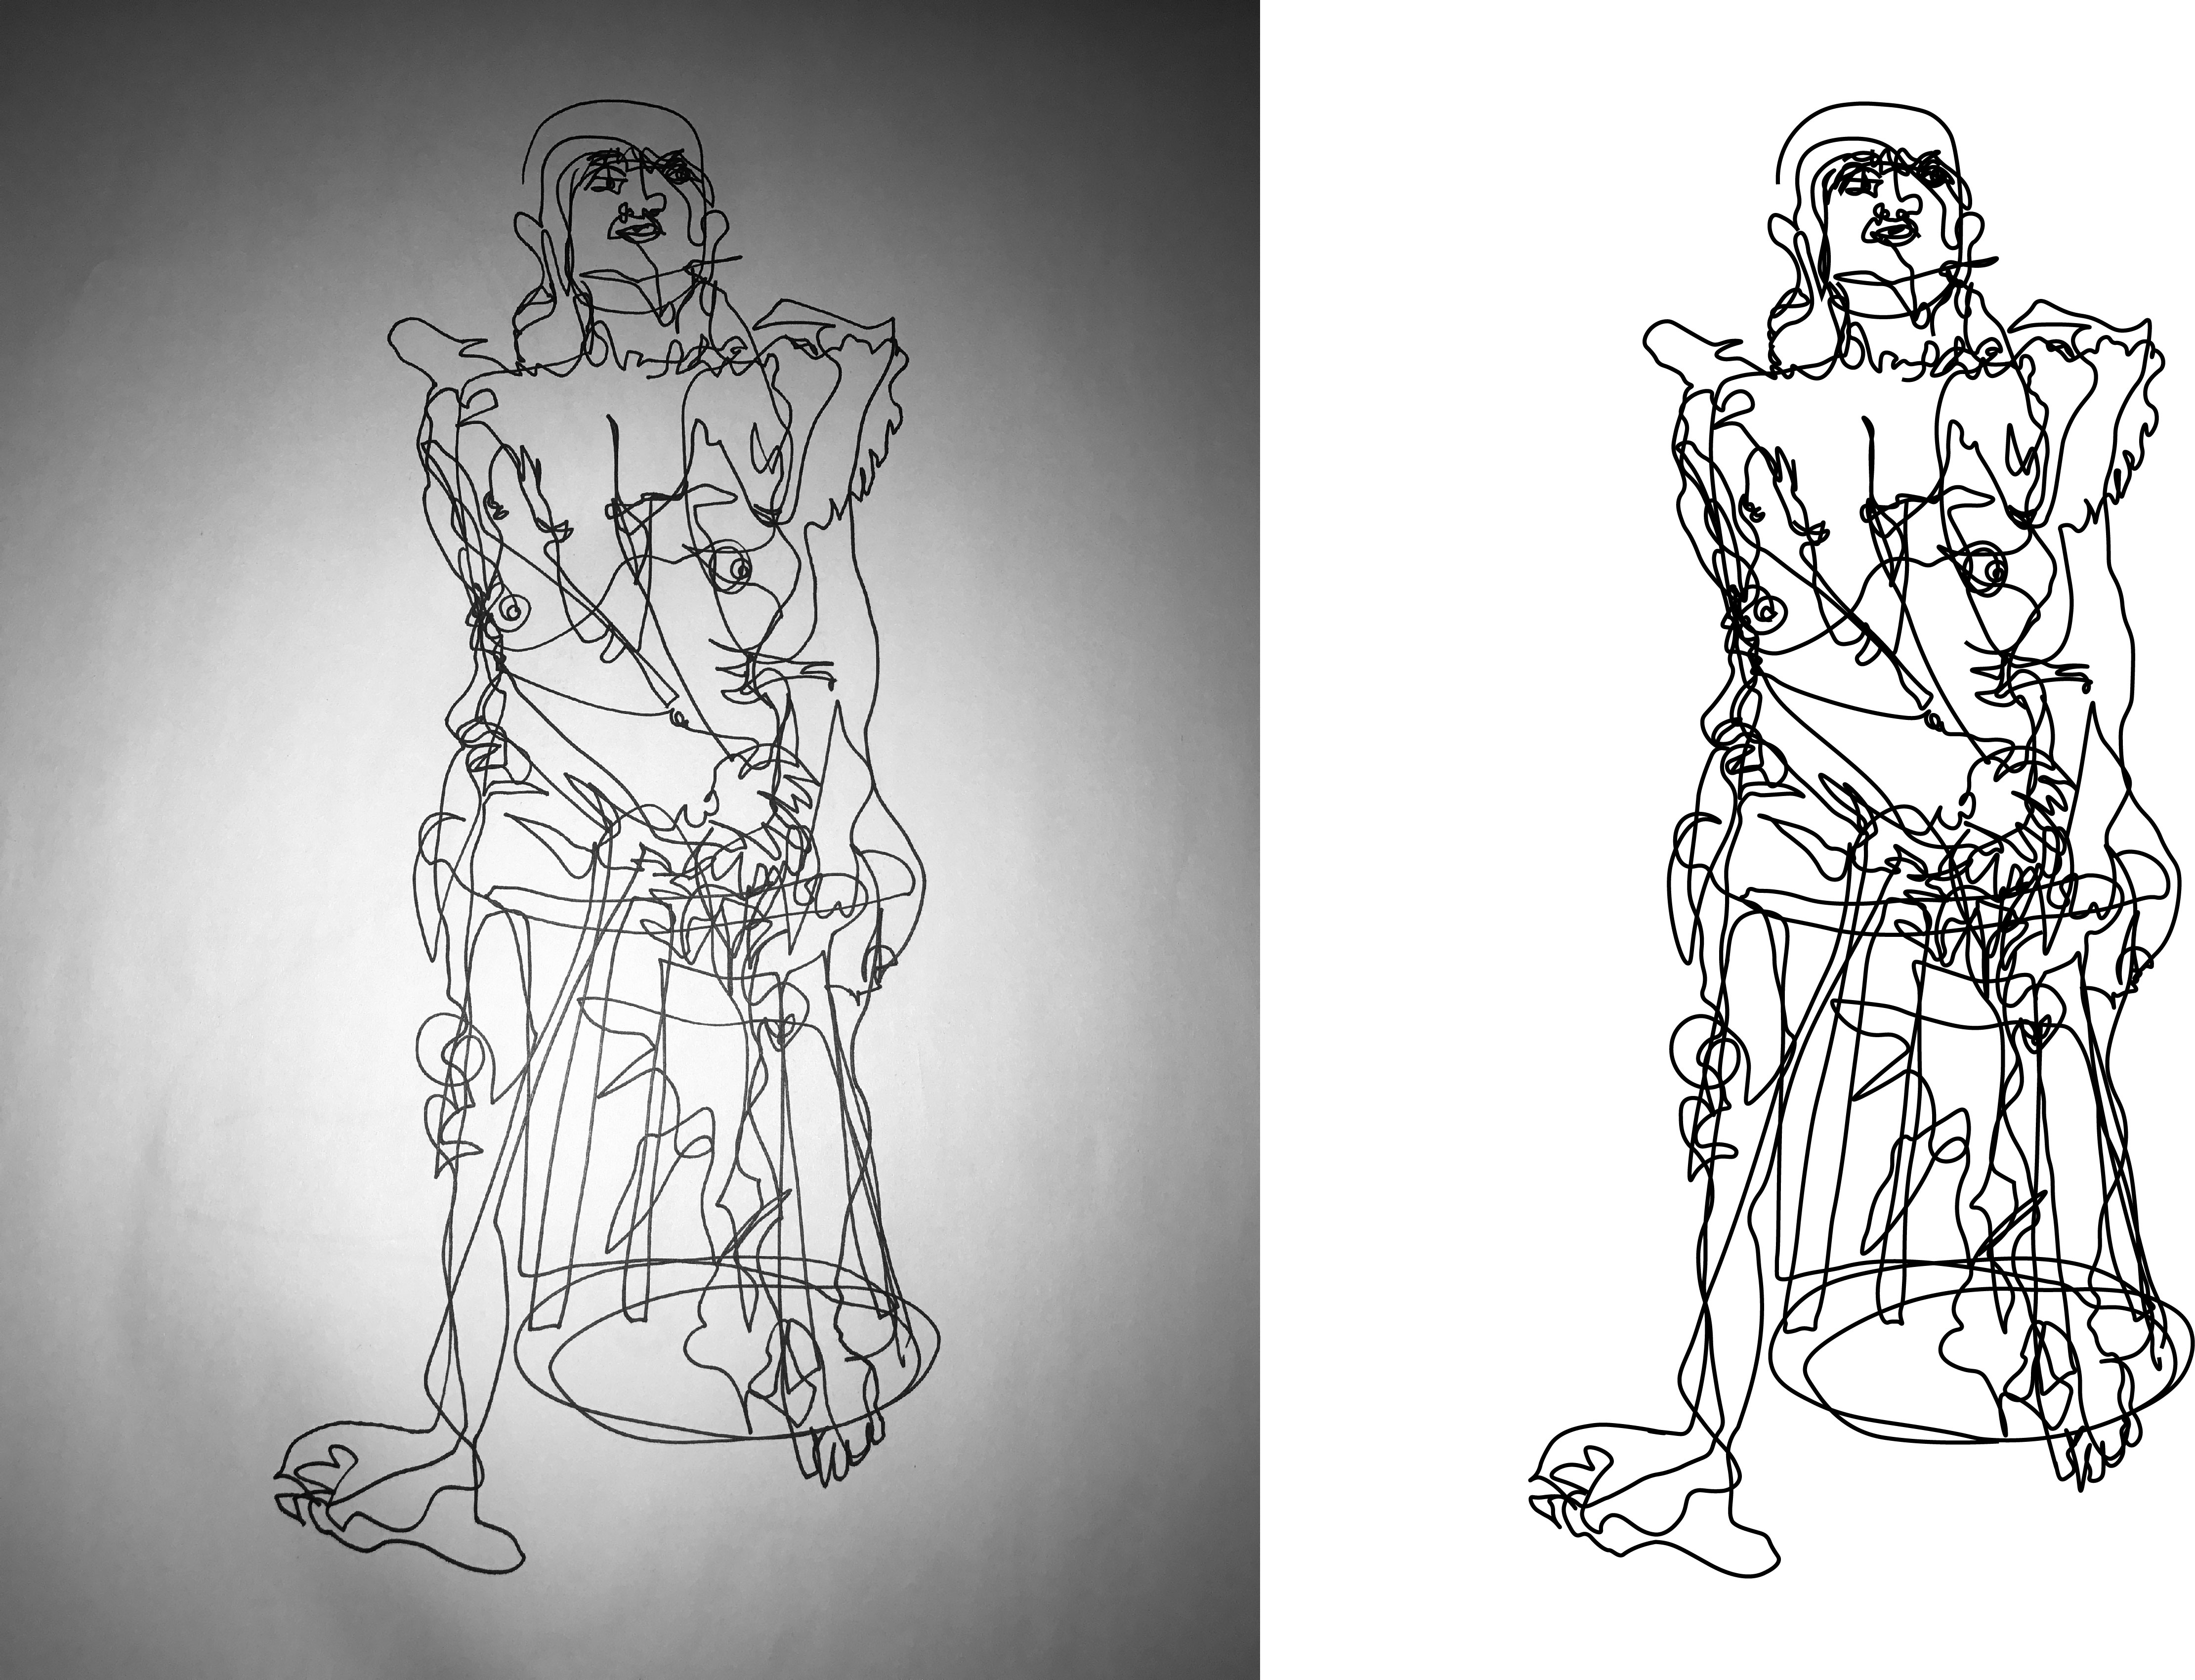 Blind Contour and Contour Lines Illustrator – Jeff Beebe